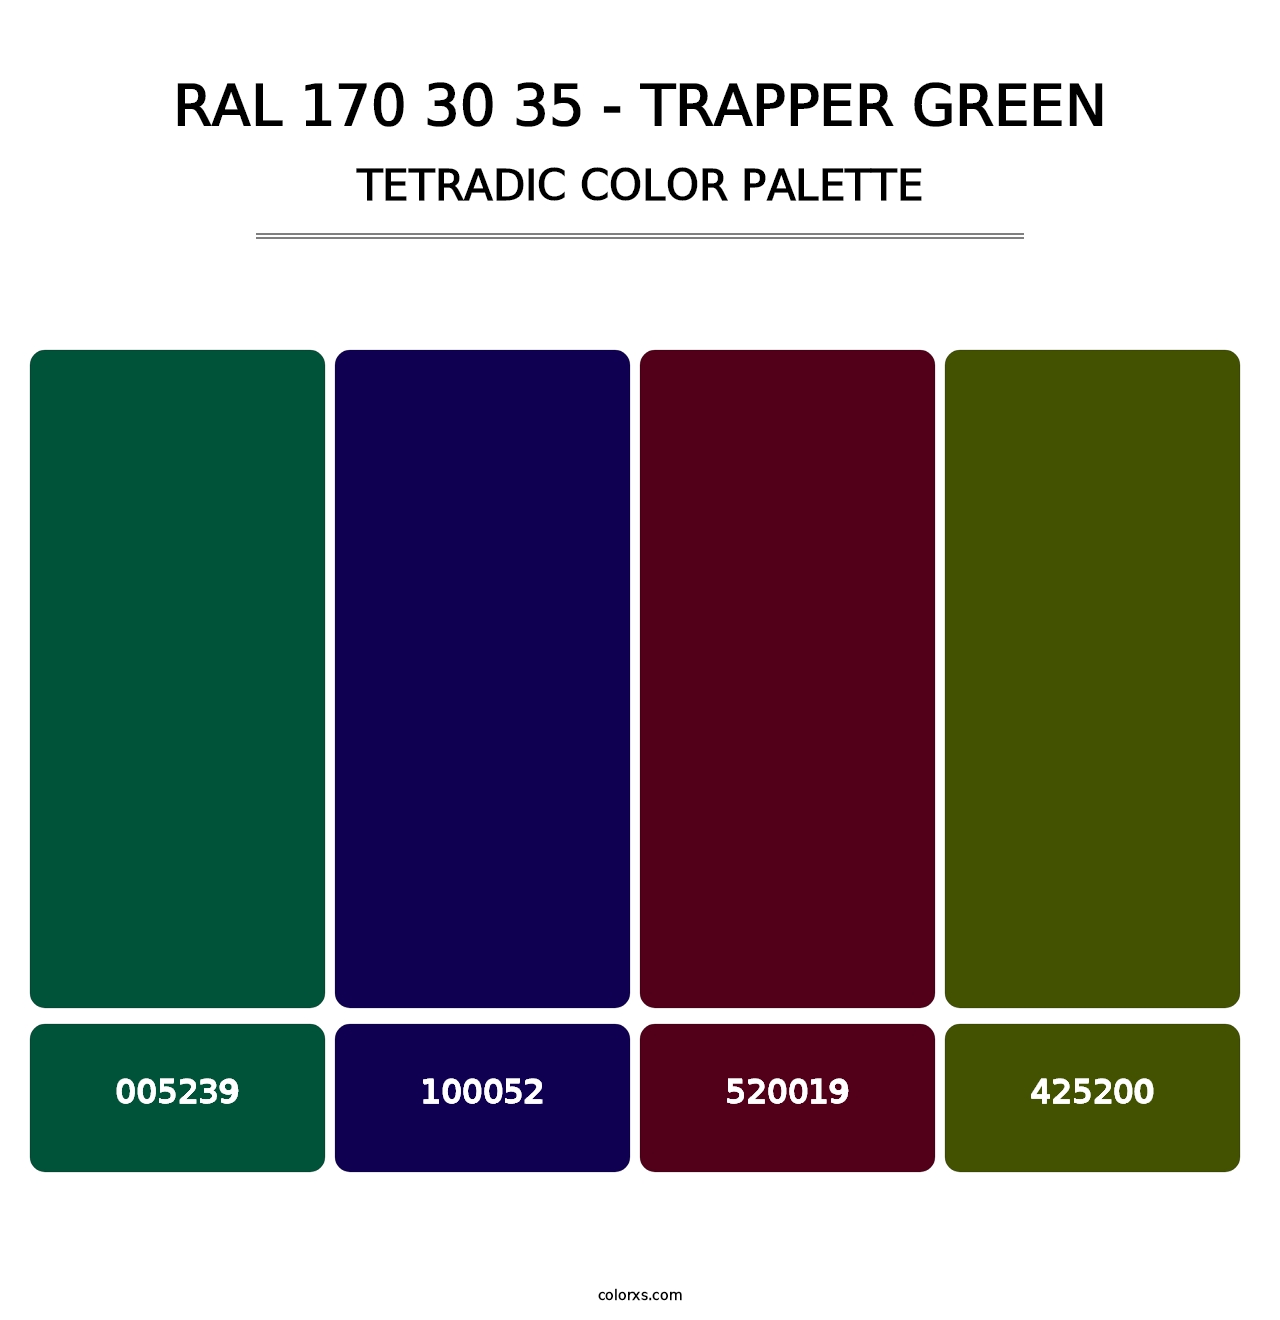 RAL 170 30 35 - Trapper Green - Tetradic Color Palette